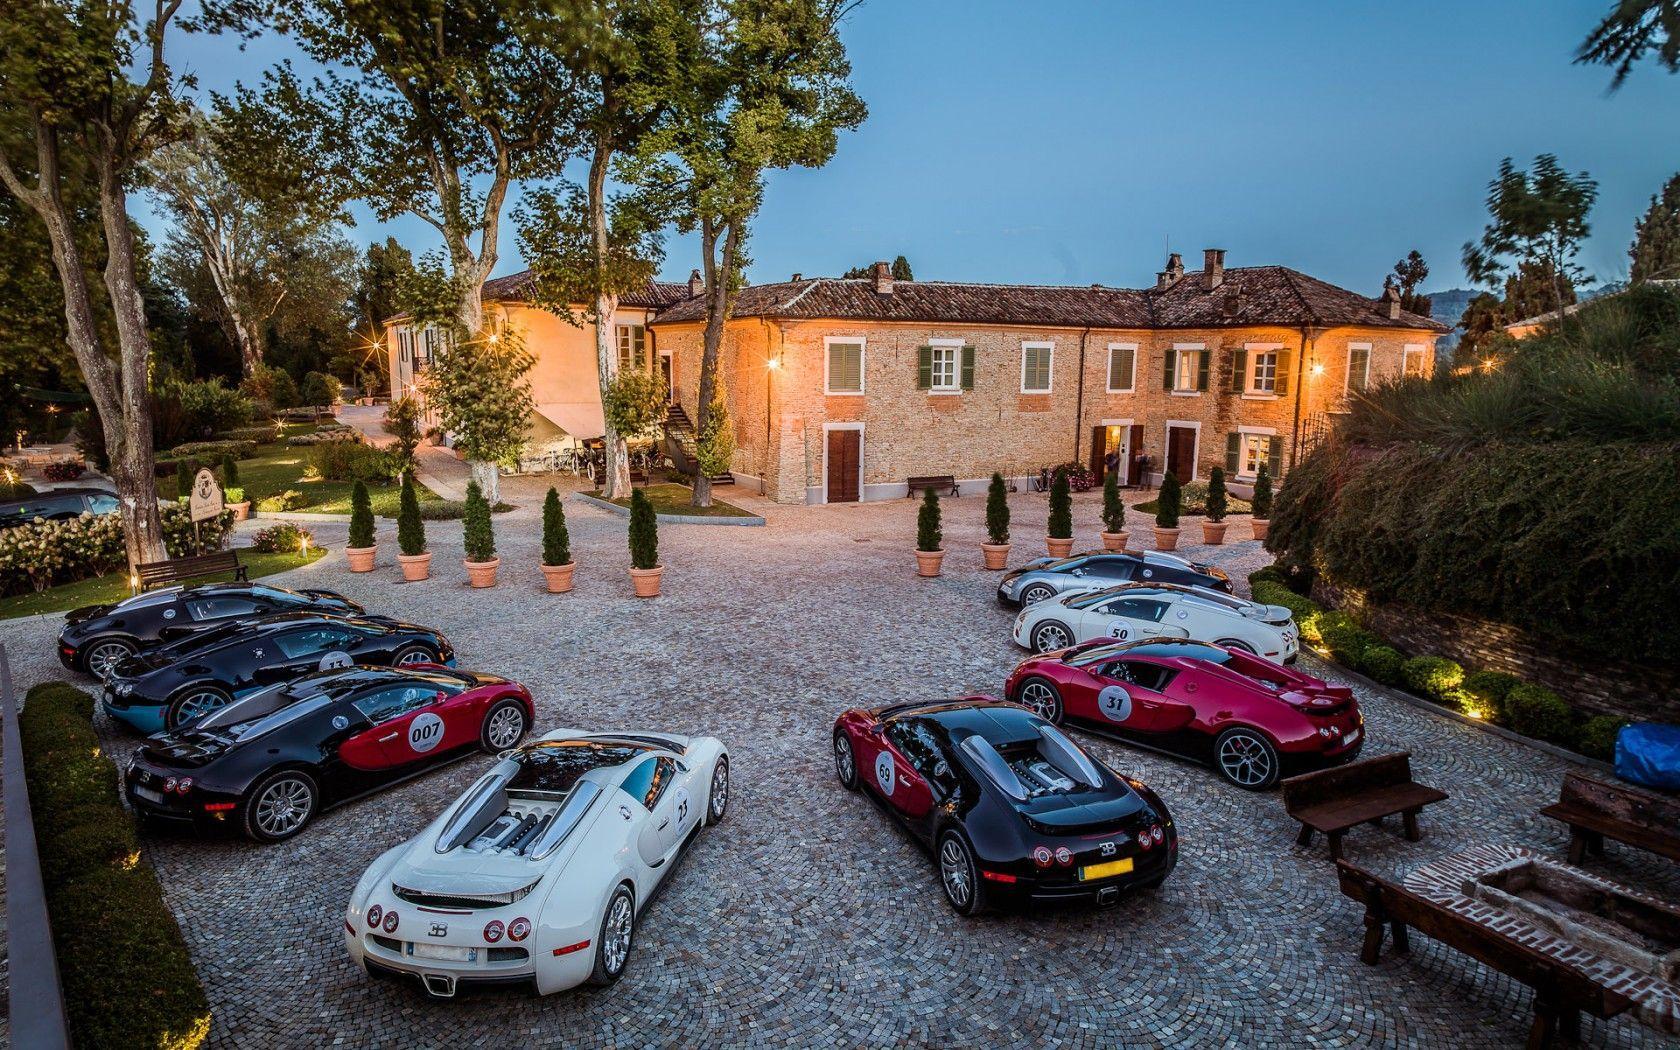 Mansion With Cars Wallpaper